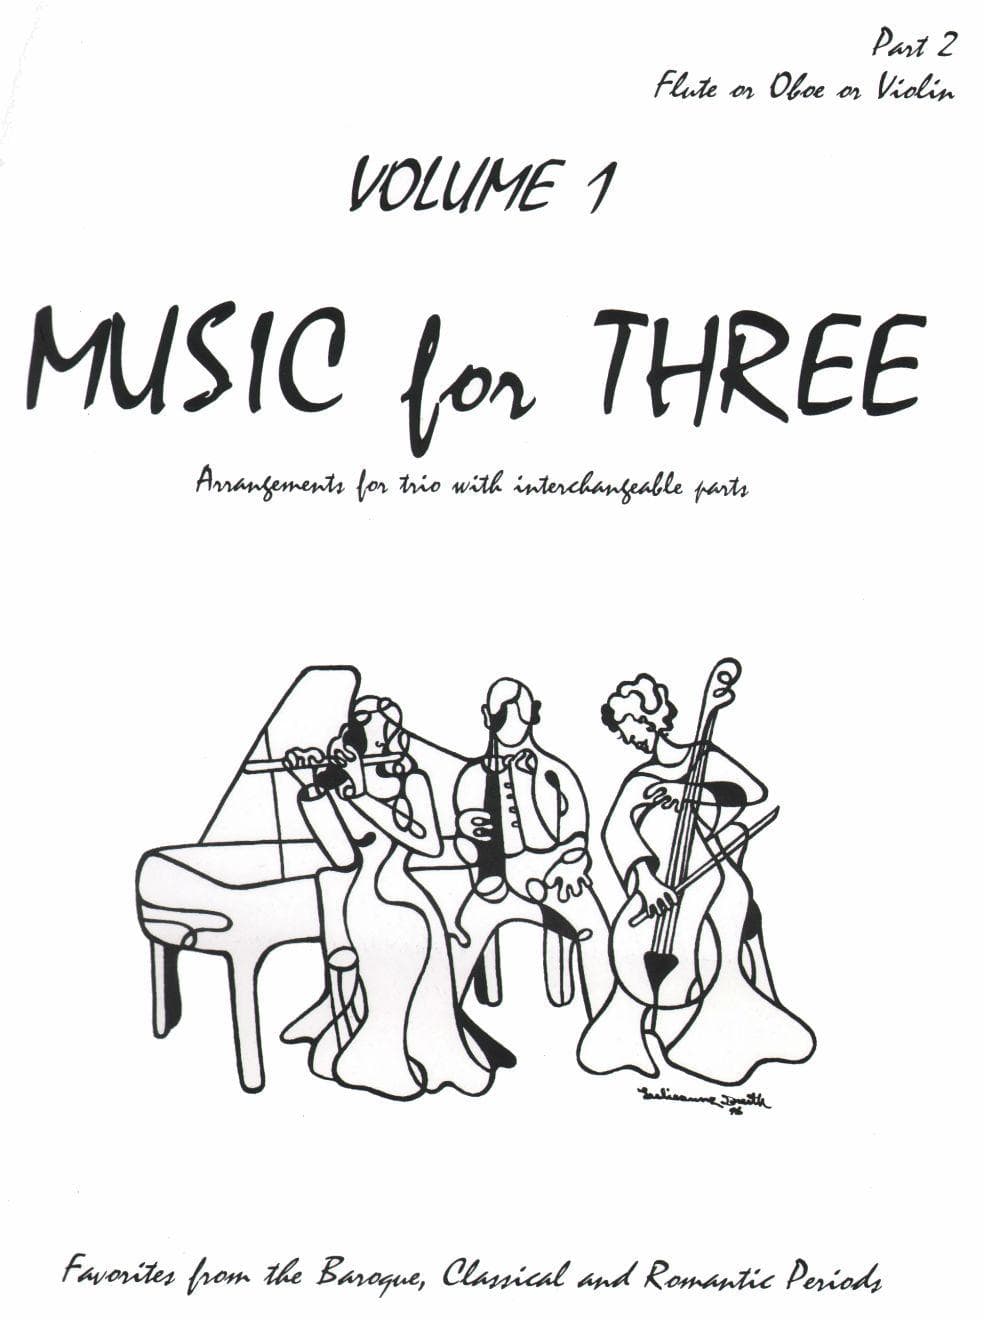 Music for Three Volume 1 Part 2 Violin, Oboe or Flute Published by Last Resort Music